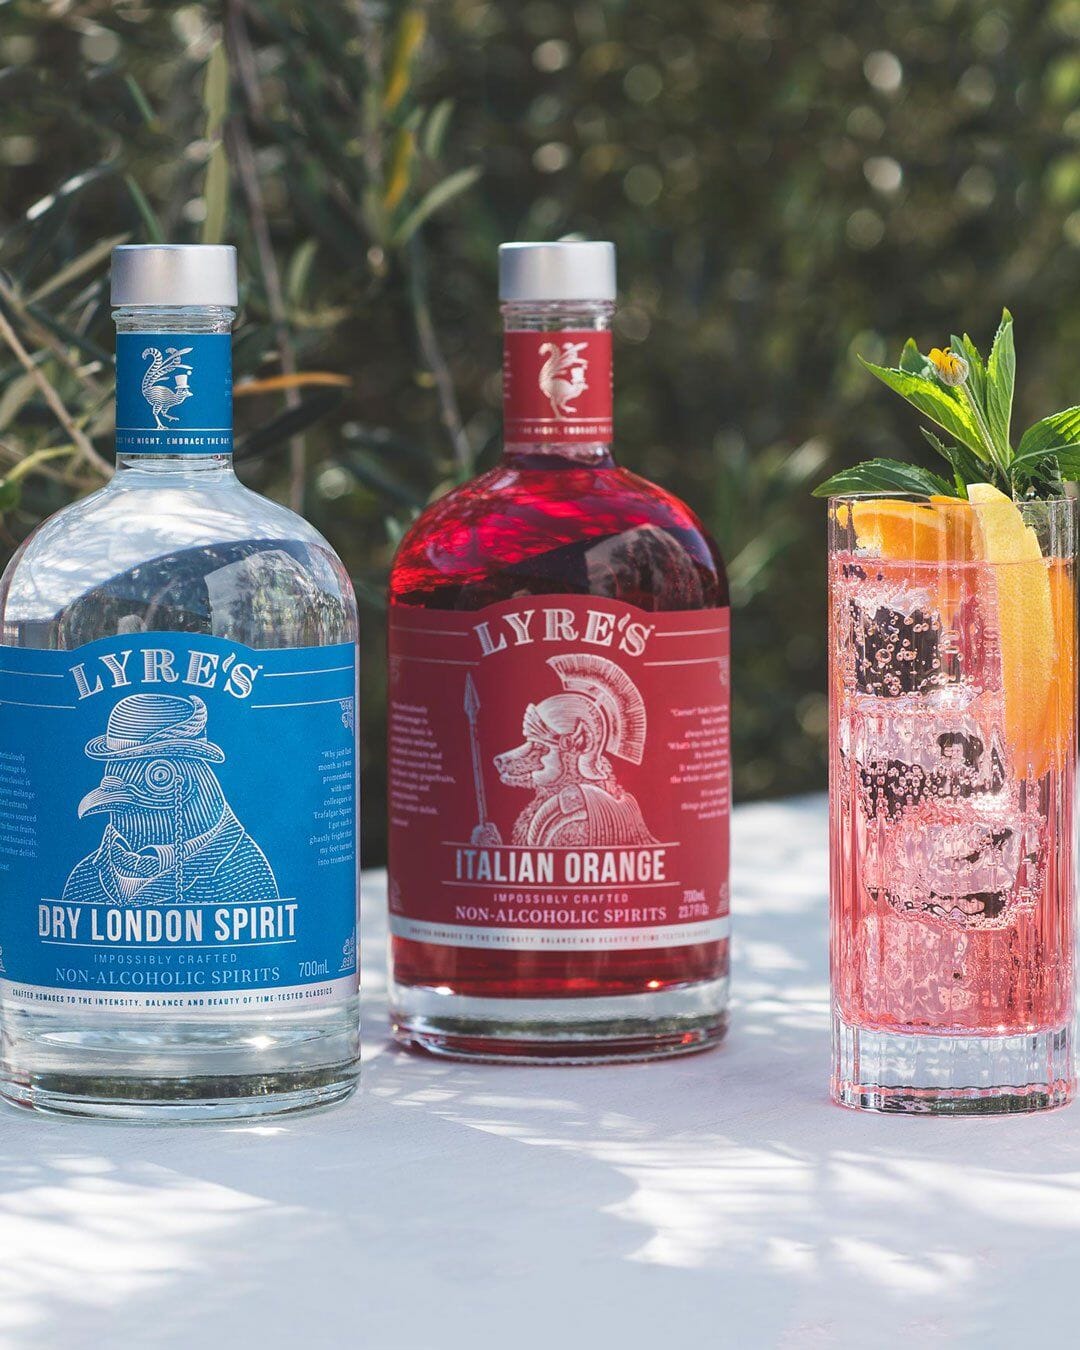 Bottle of Lyre’s Dry London Spirit and a bottle of Lyre’s Italian Orange next to a glass of gin fizz mocktail